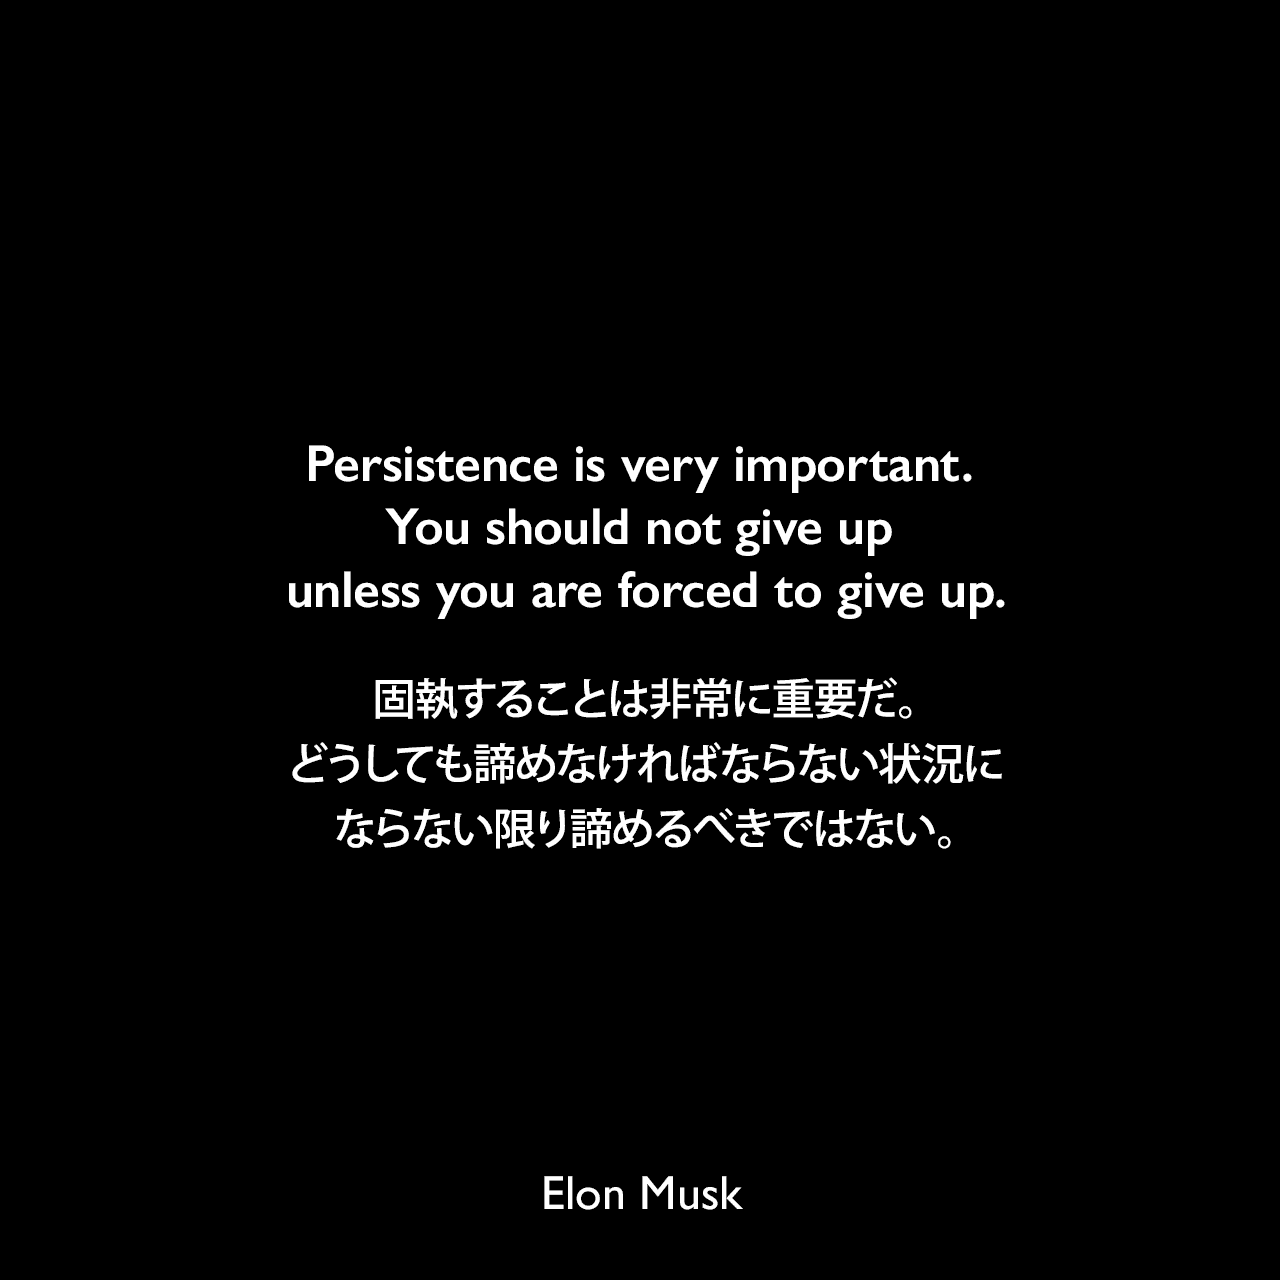 Persistence is very important. You should not give up unless you are forced to give up.固執することは非常に重要だ。どうしても諦めなければならない状況にならない限り諦めるべきではない。Elon Musk